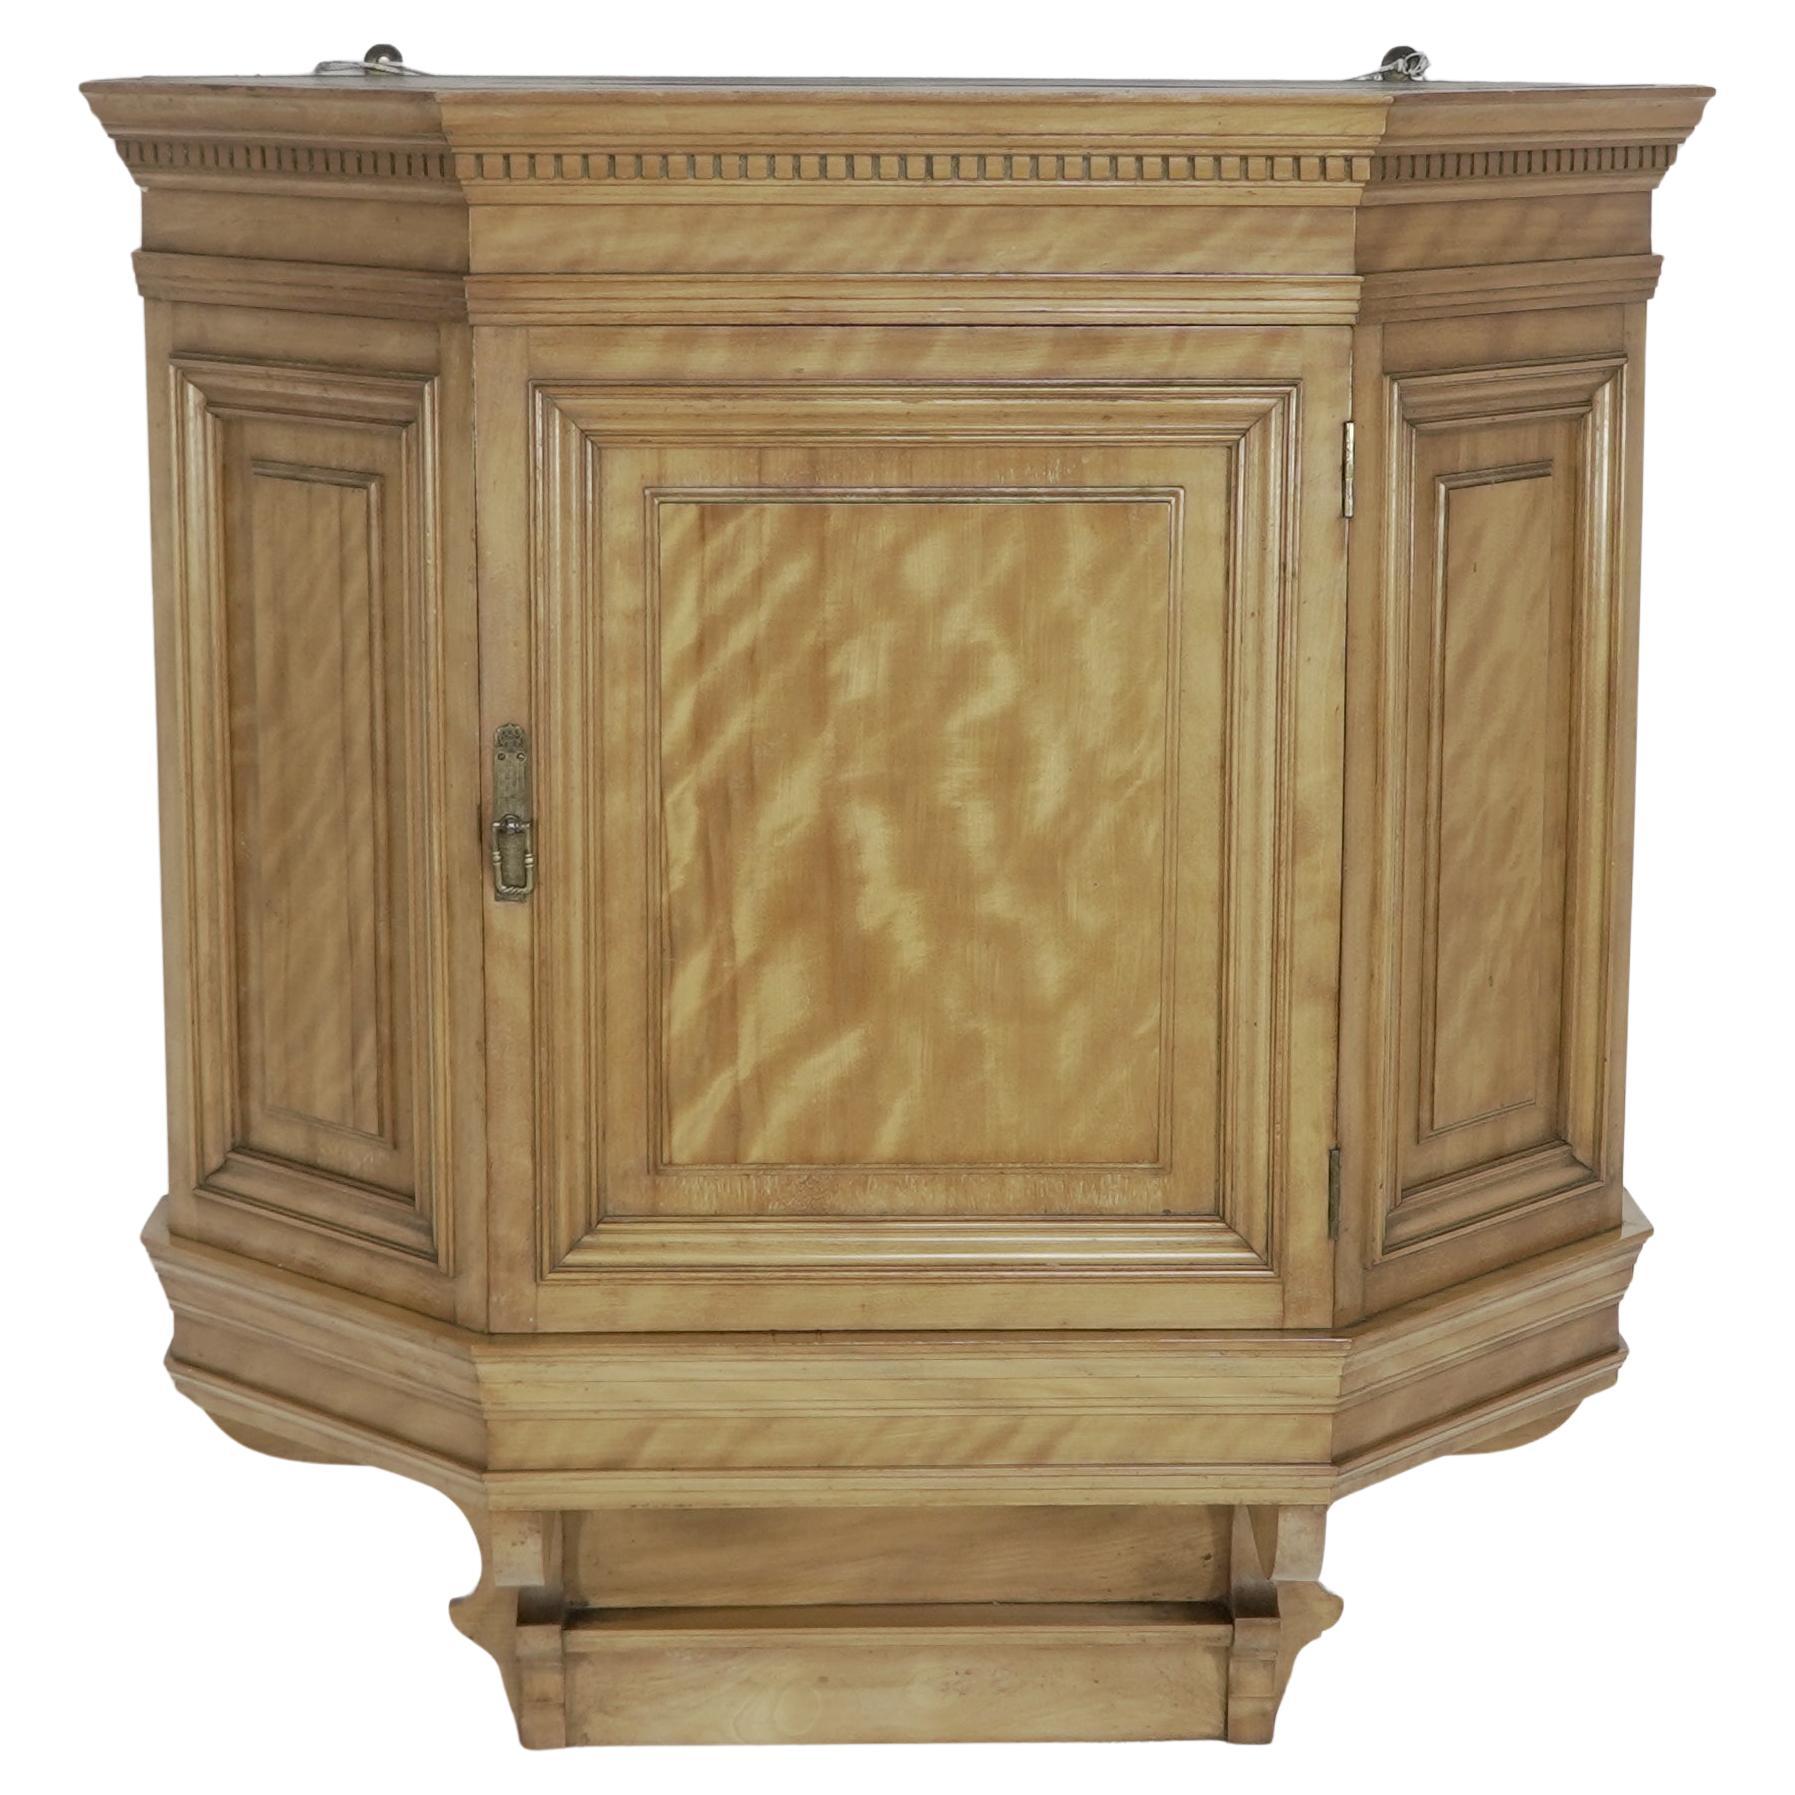 Collinson and Lock. An Aesthetic Movement Satin walnut breakfront wall cupboard For Sale